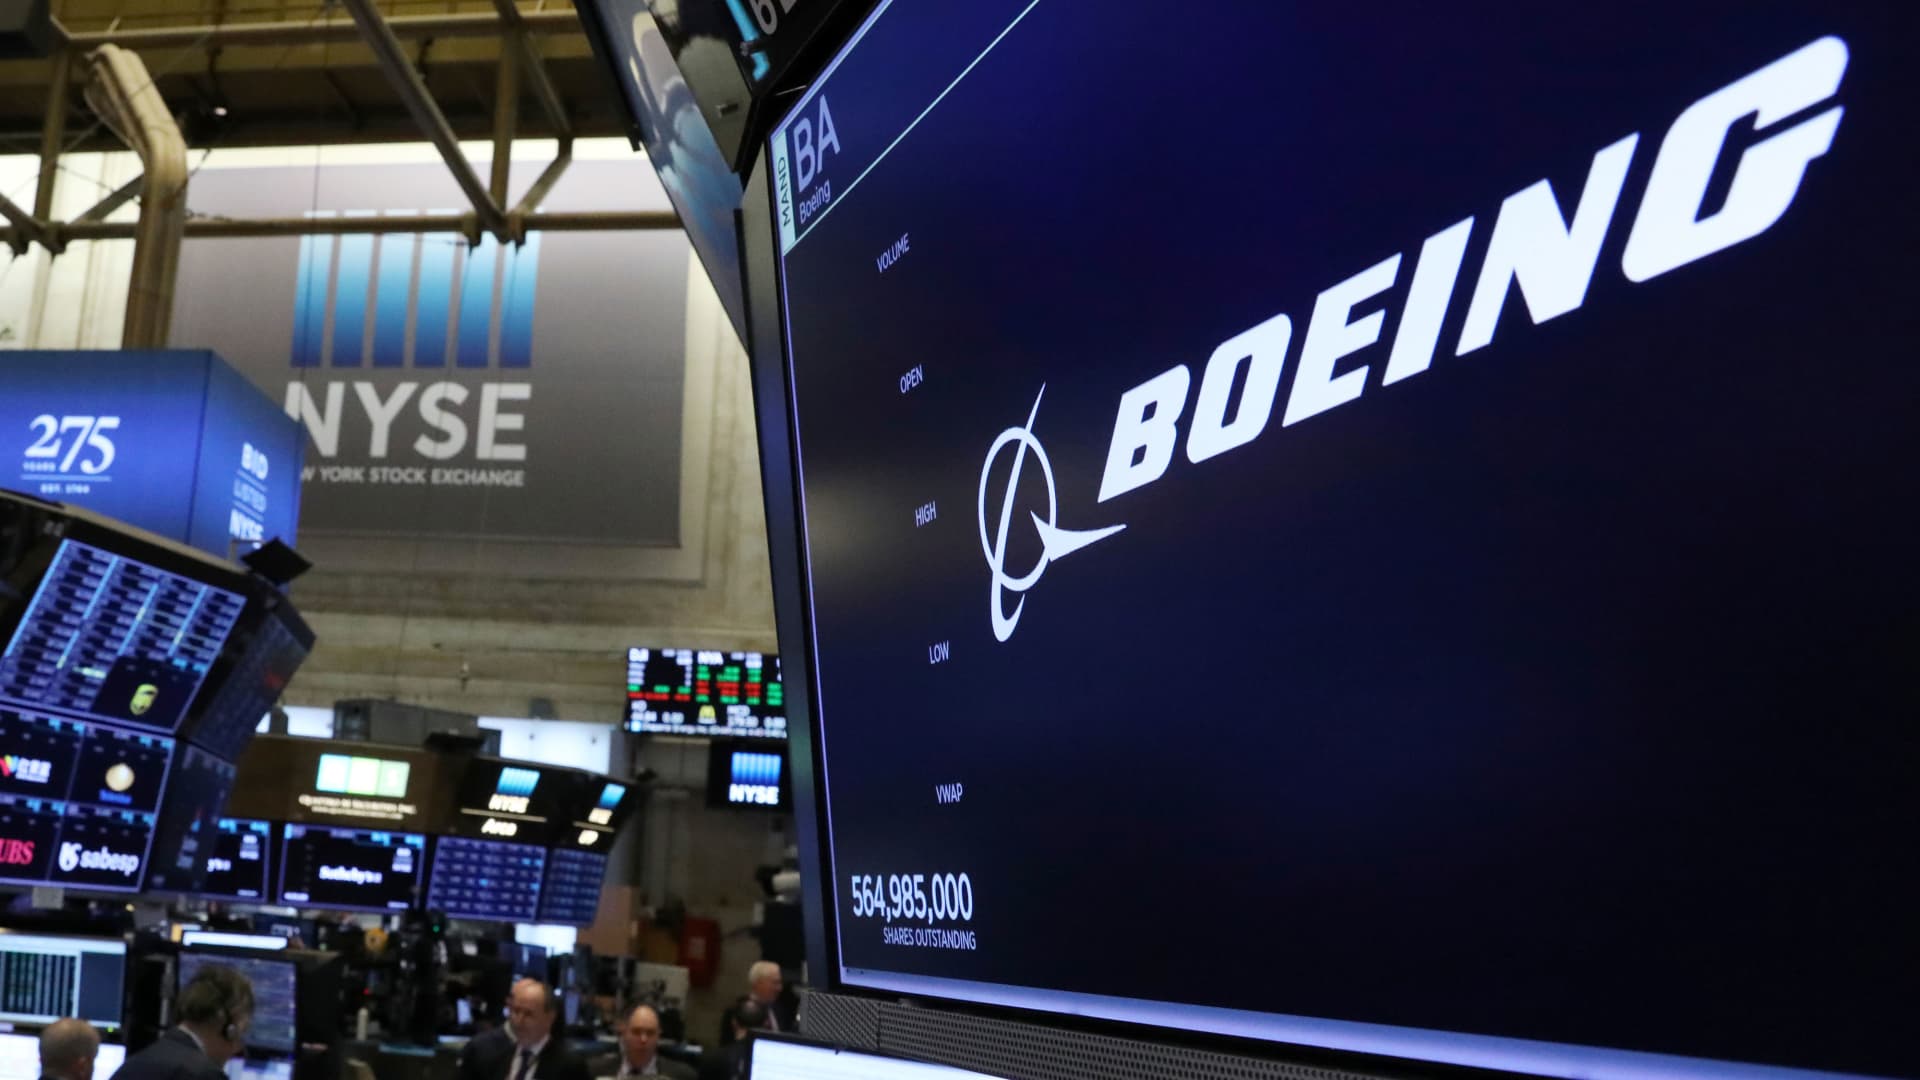 Boeing to slash about 2,000 white-collar jobs in finance and HR, report says